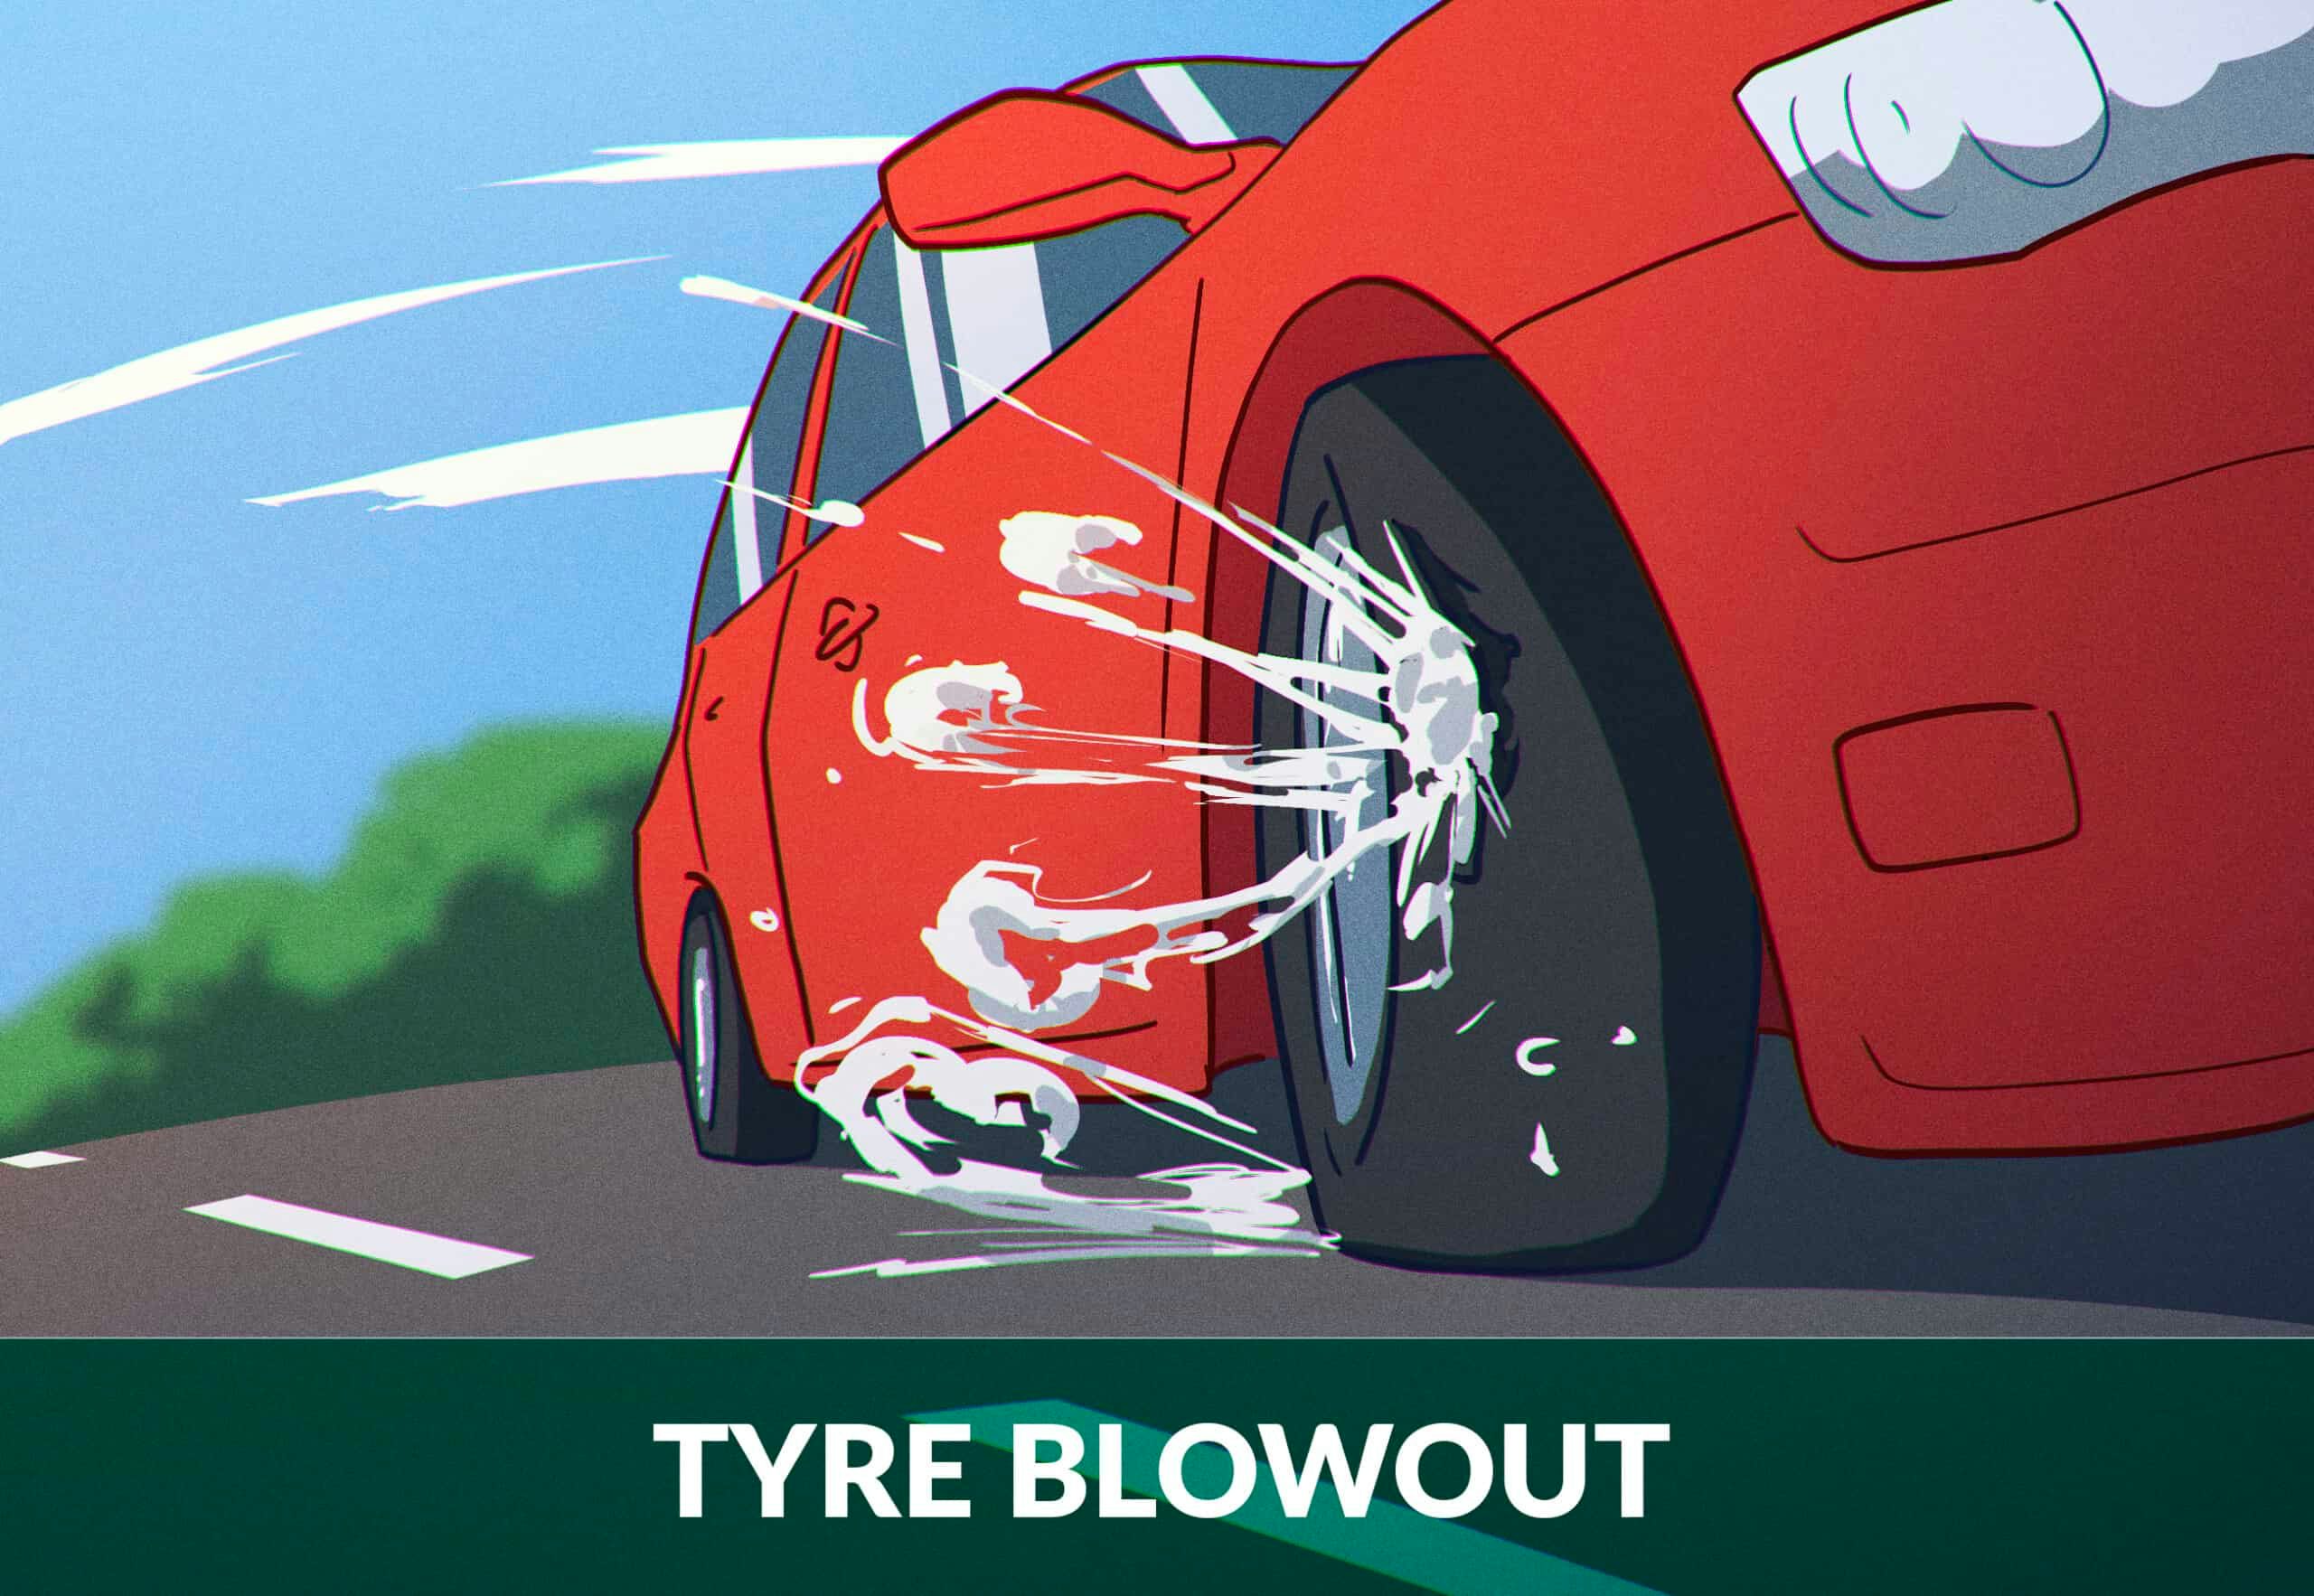 Tyre blowout